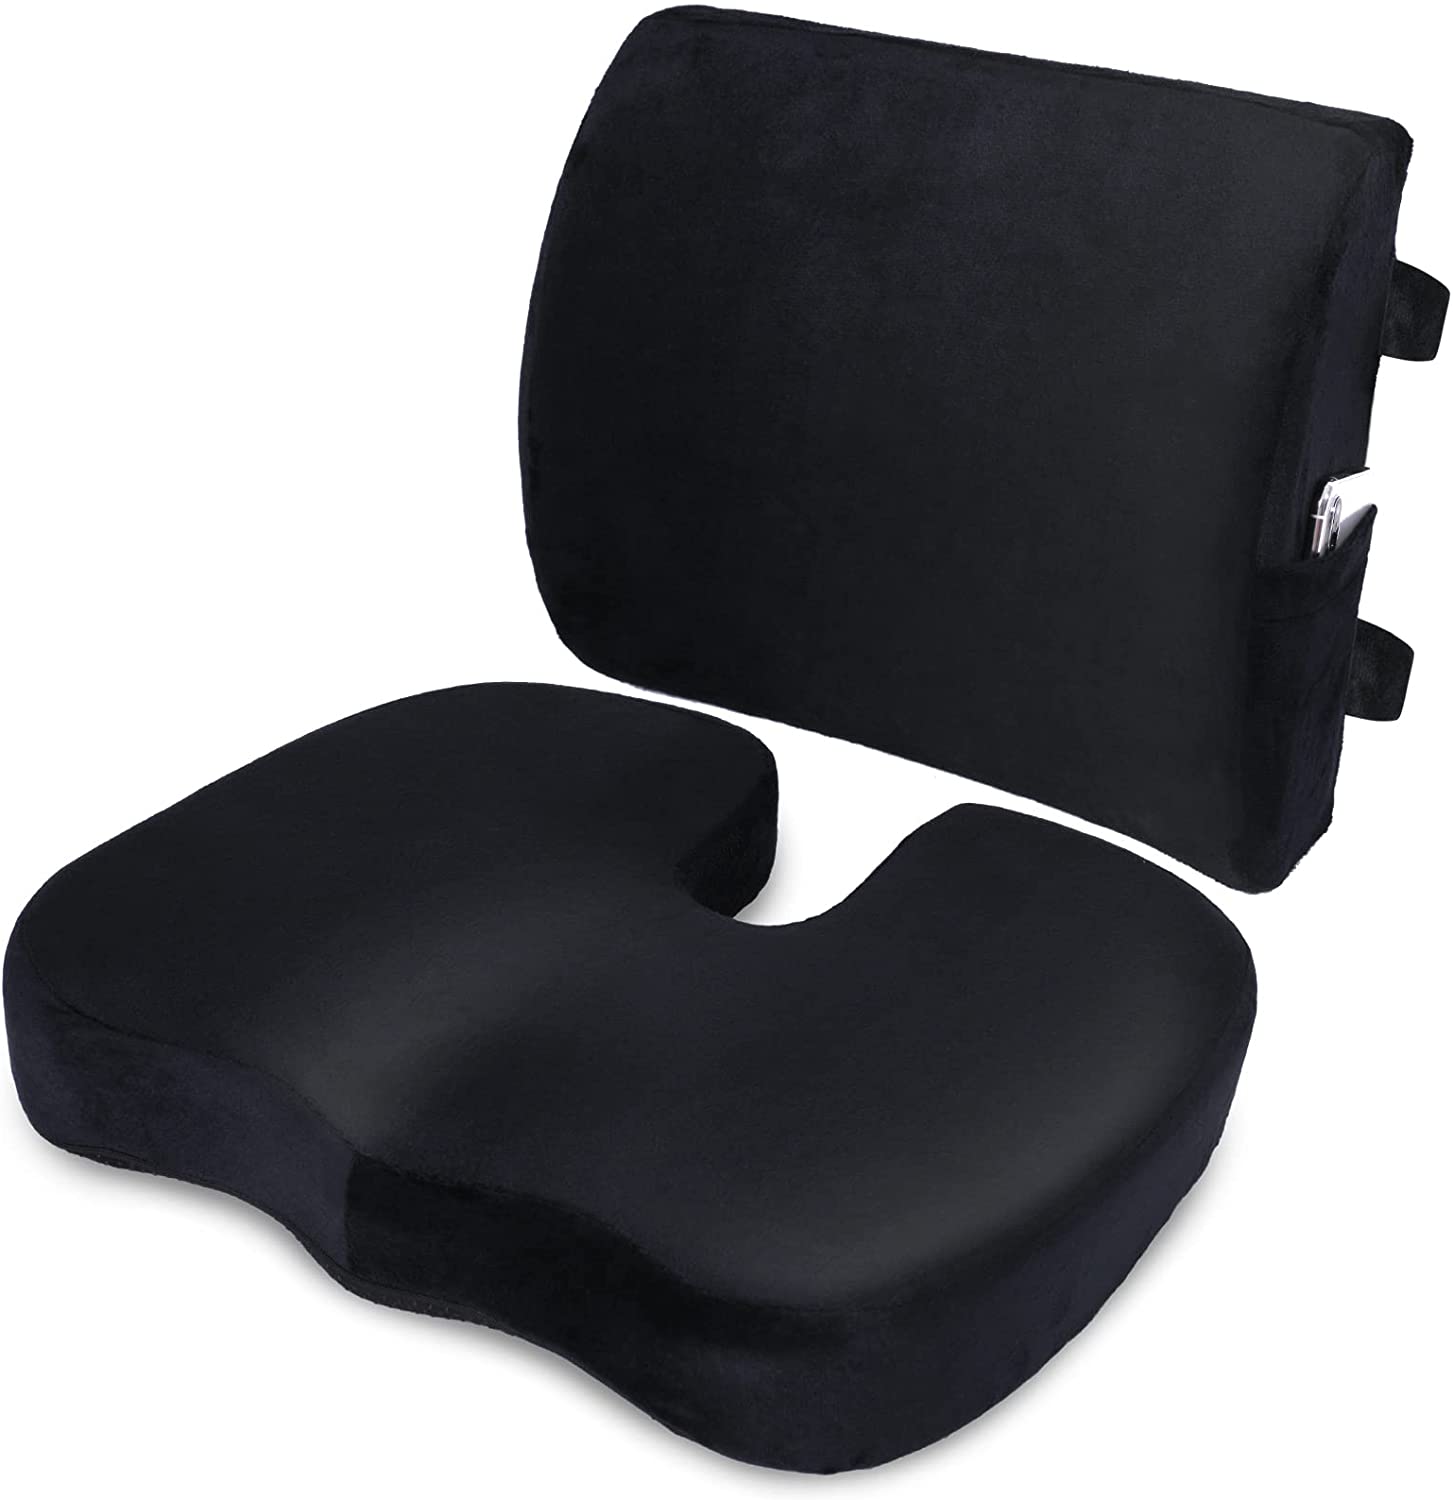 Car Seat Cushion With Back Rest